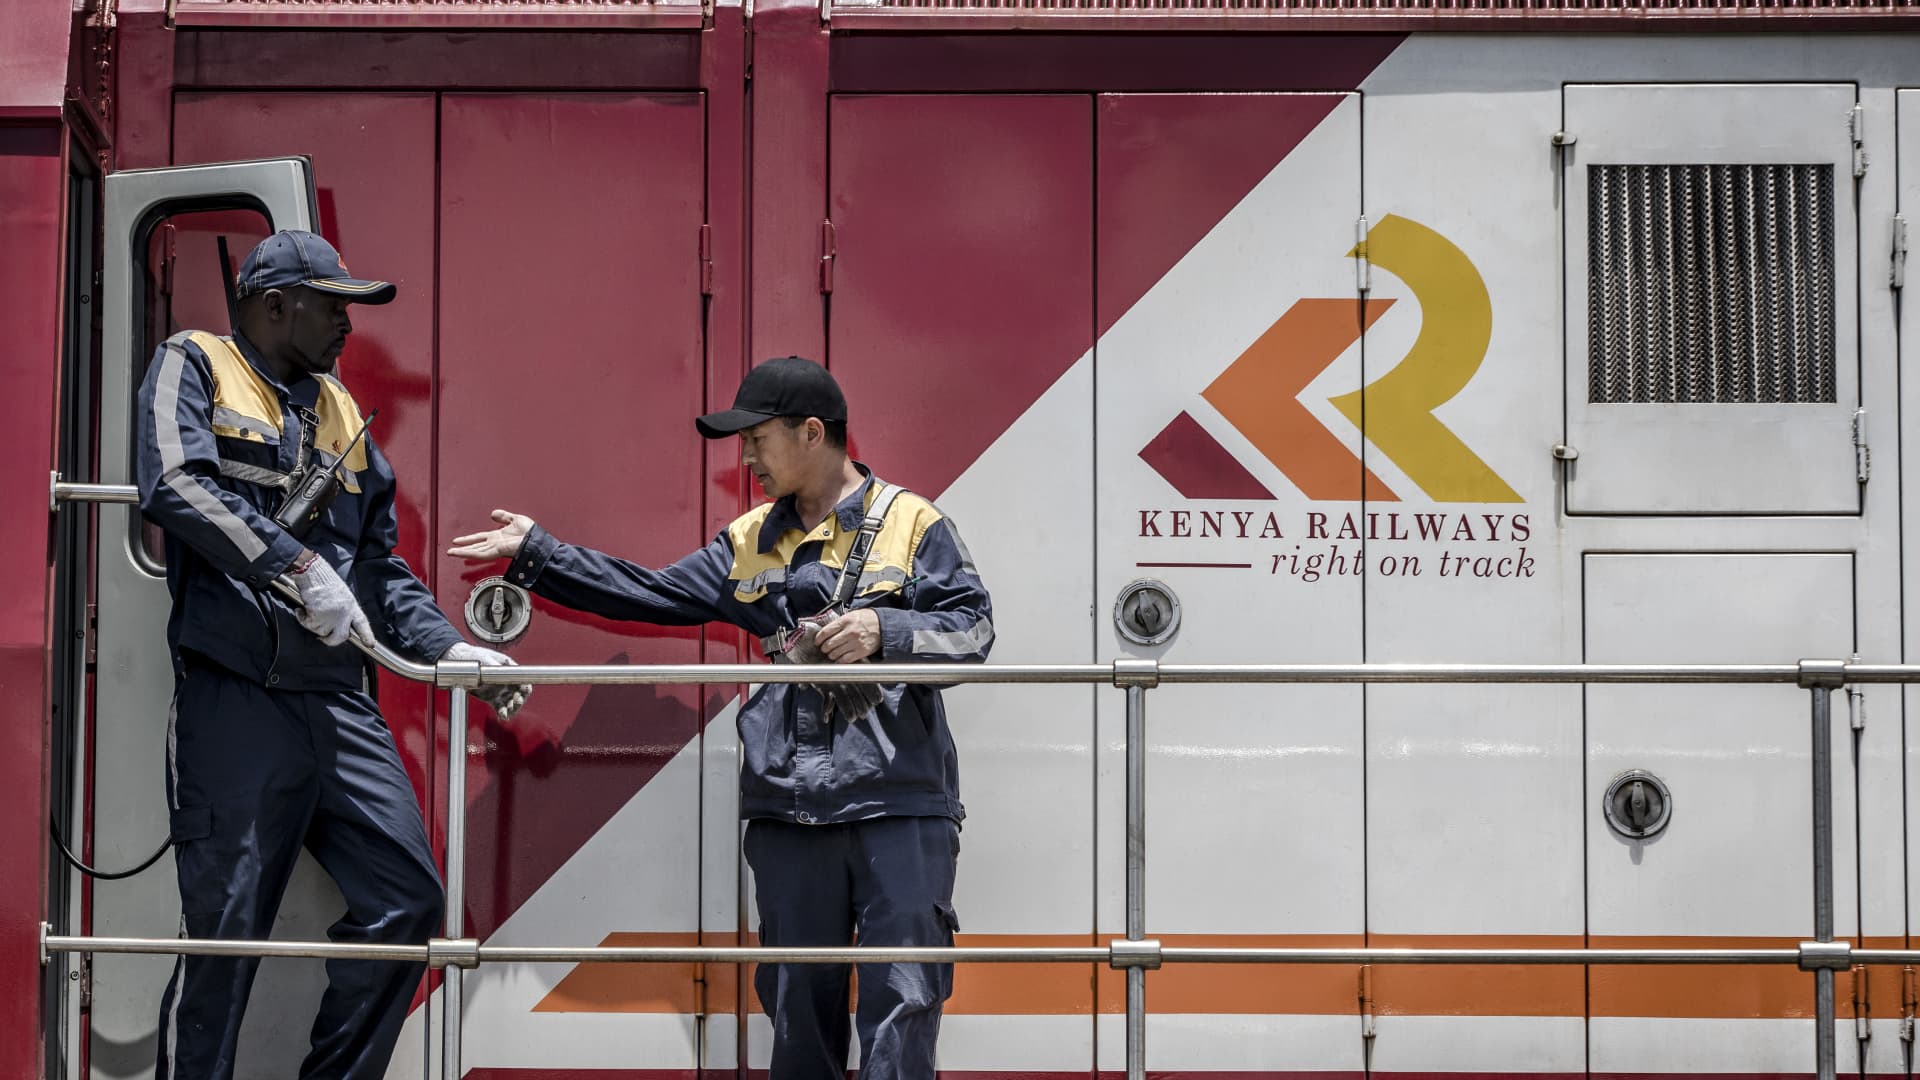 Railway workers inspect a Kenya Railways freight train before departure from the port station in Mombasa, Kenya, on Saturday, Sept. 1, 2018.